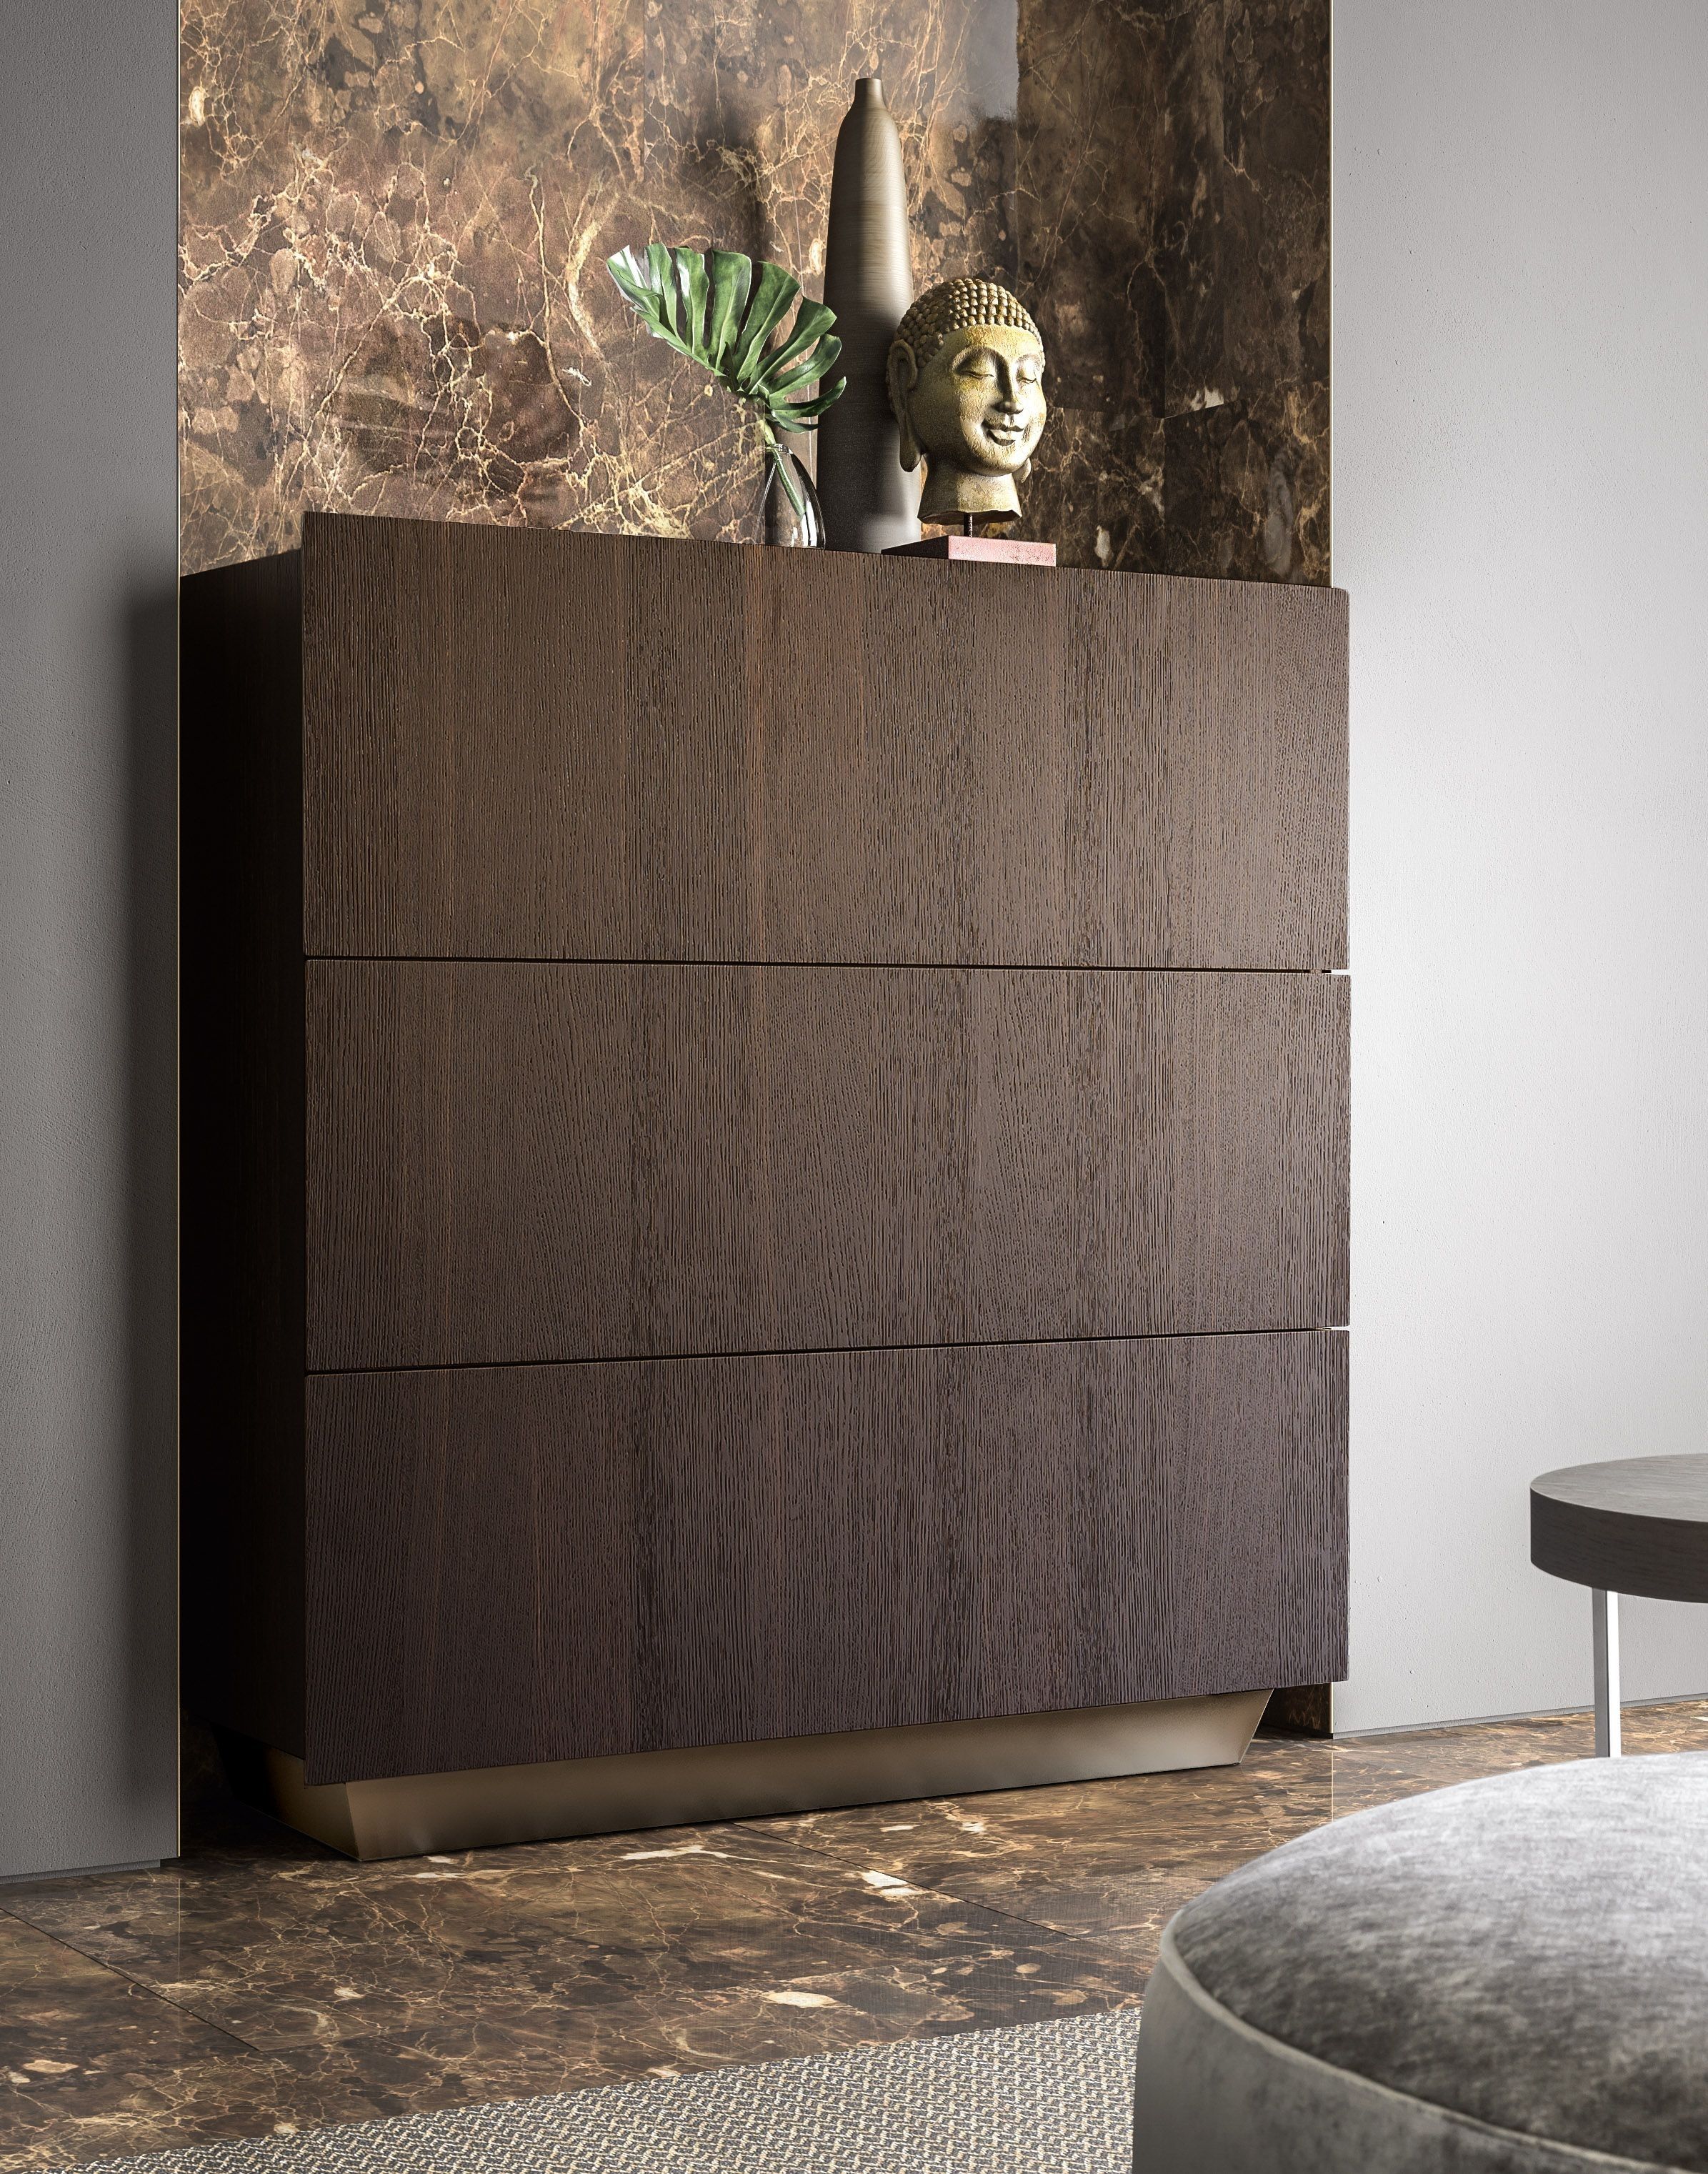 Tosca Sideboard With Burnt Oak Exterior And Bronze Base | Pianca With Best And Newest Burnt Oak Wood Sideboards (View 4 of 20)